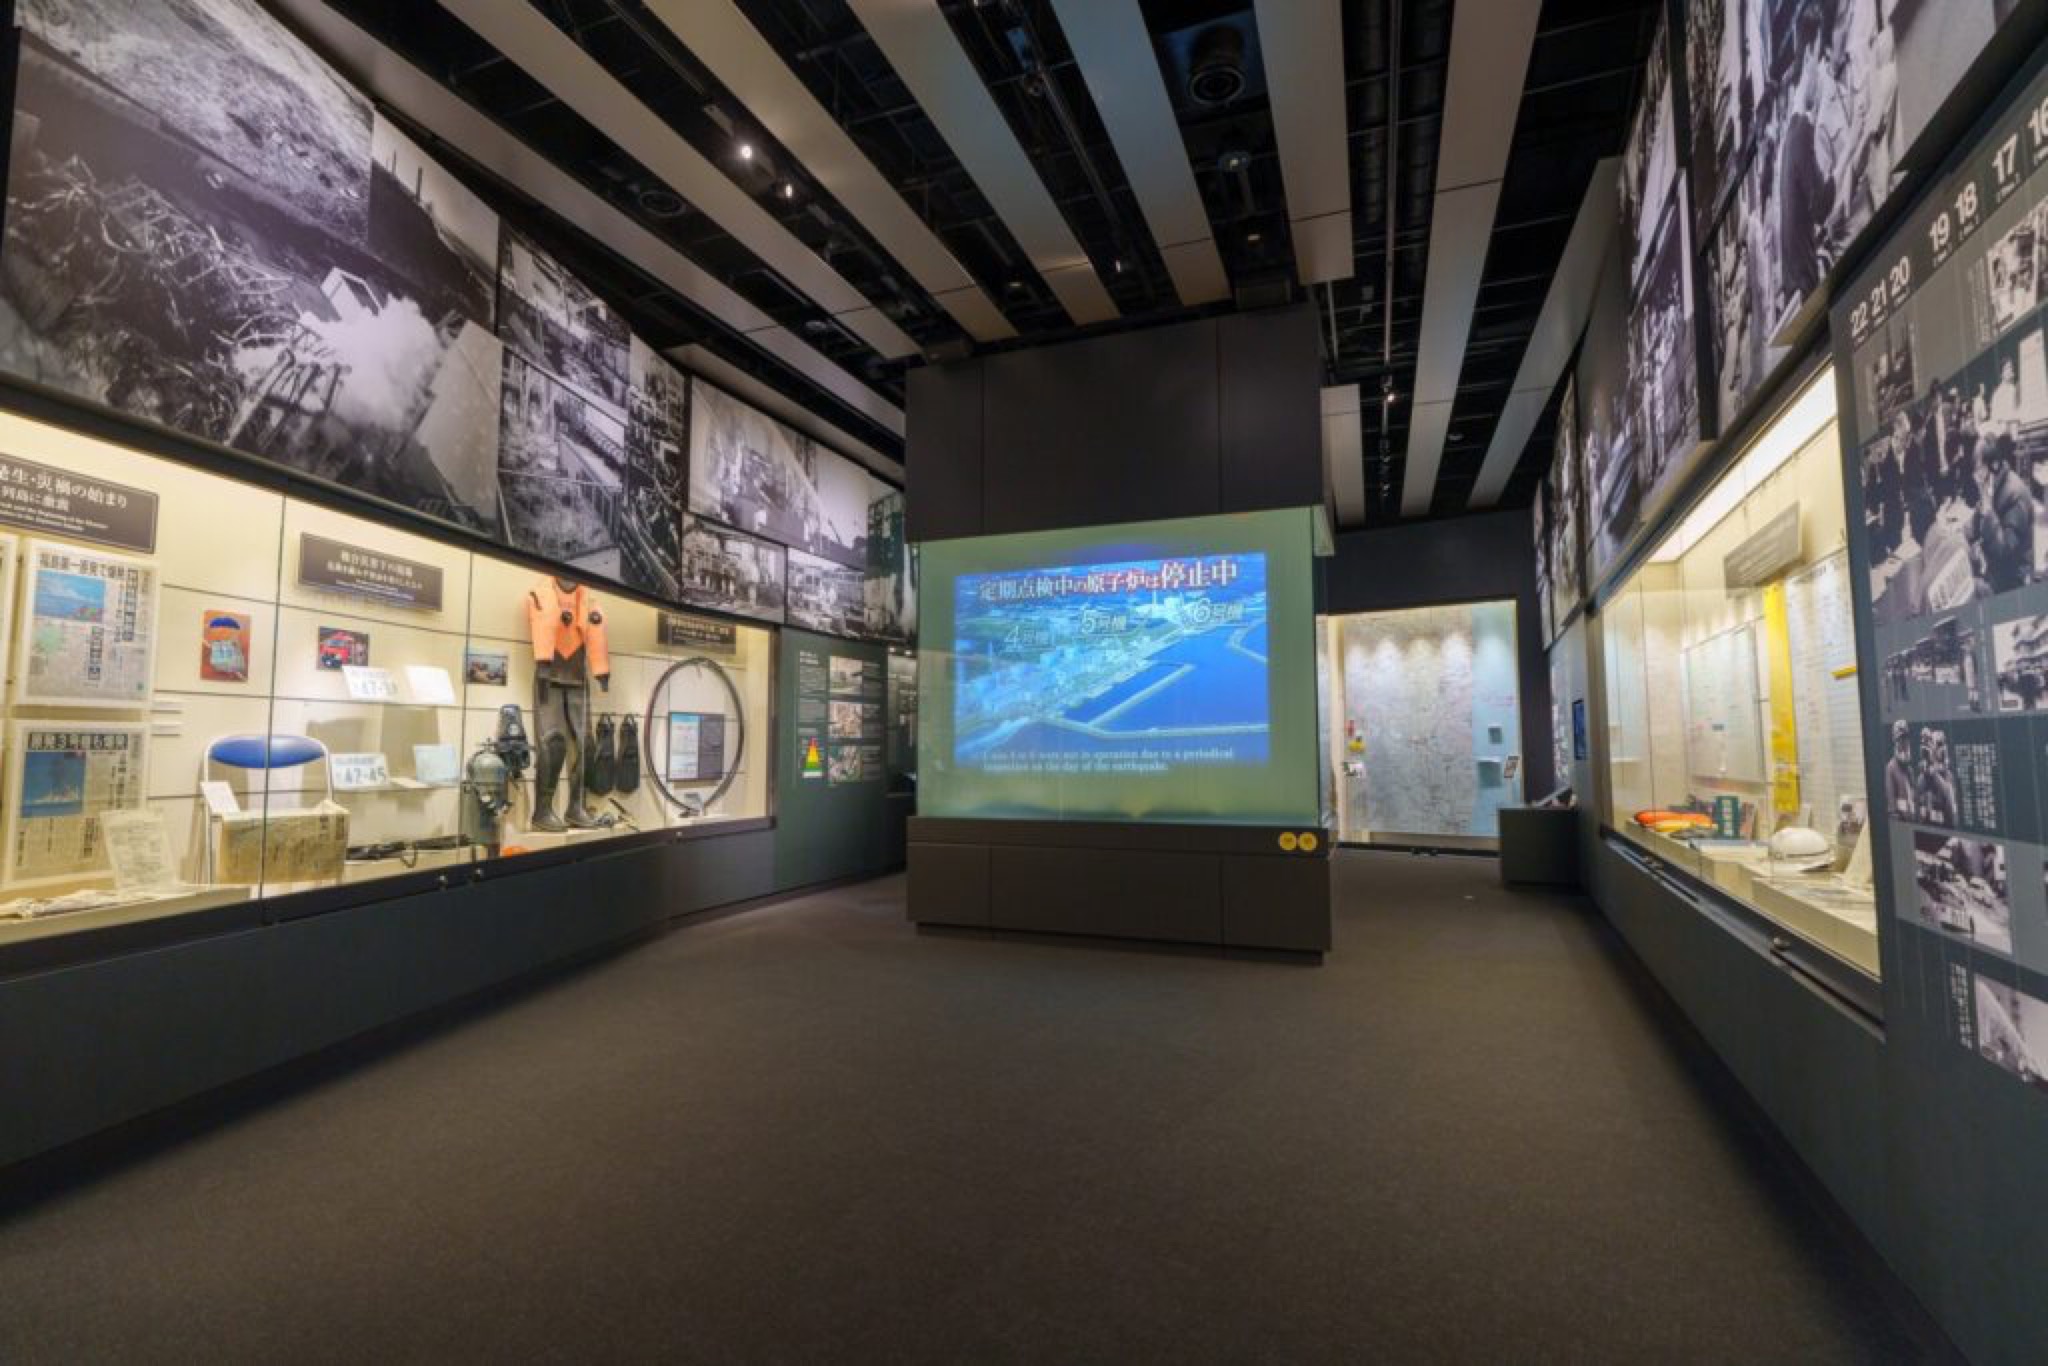 The Great East Japan Earthquake and Nuclear Disaster Memorial Museum